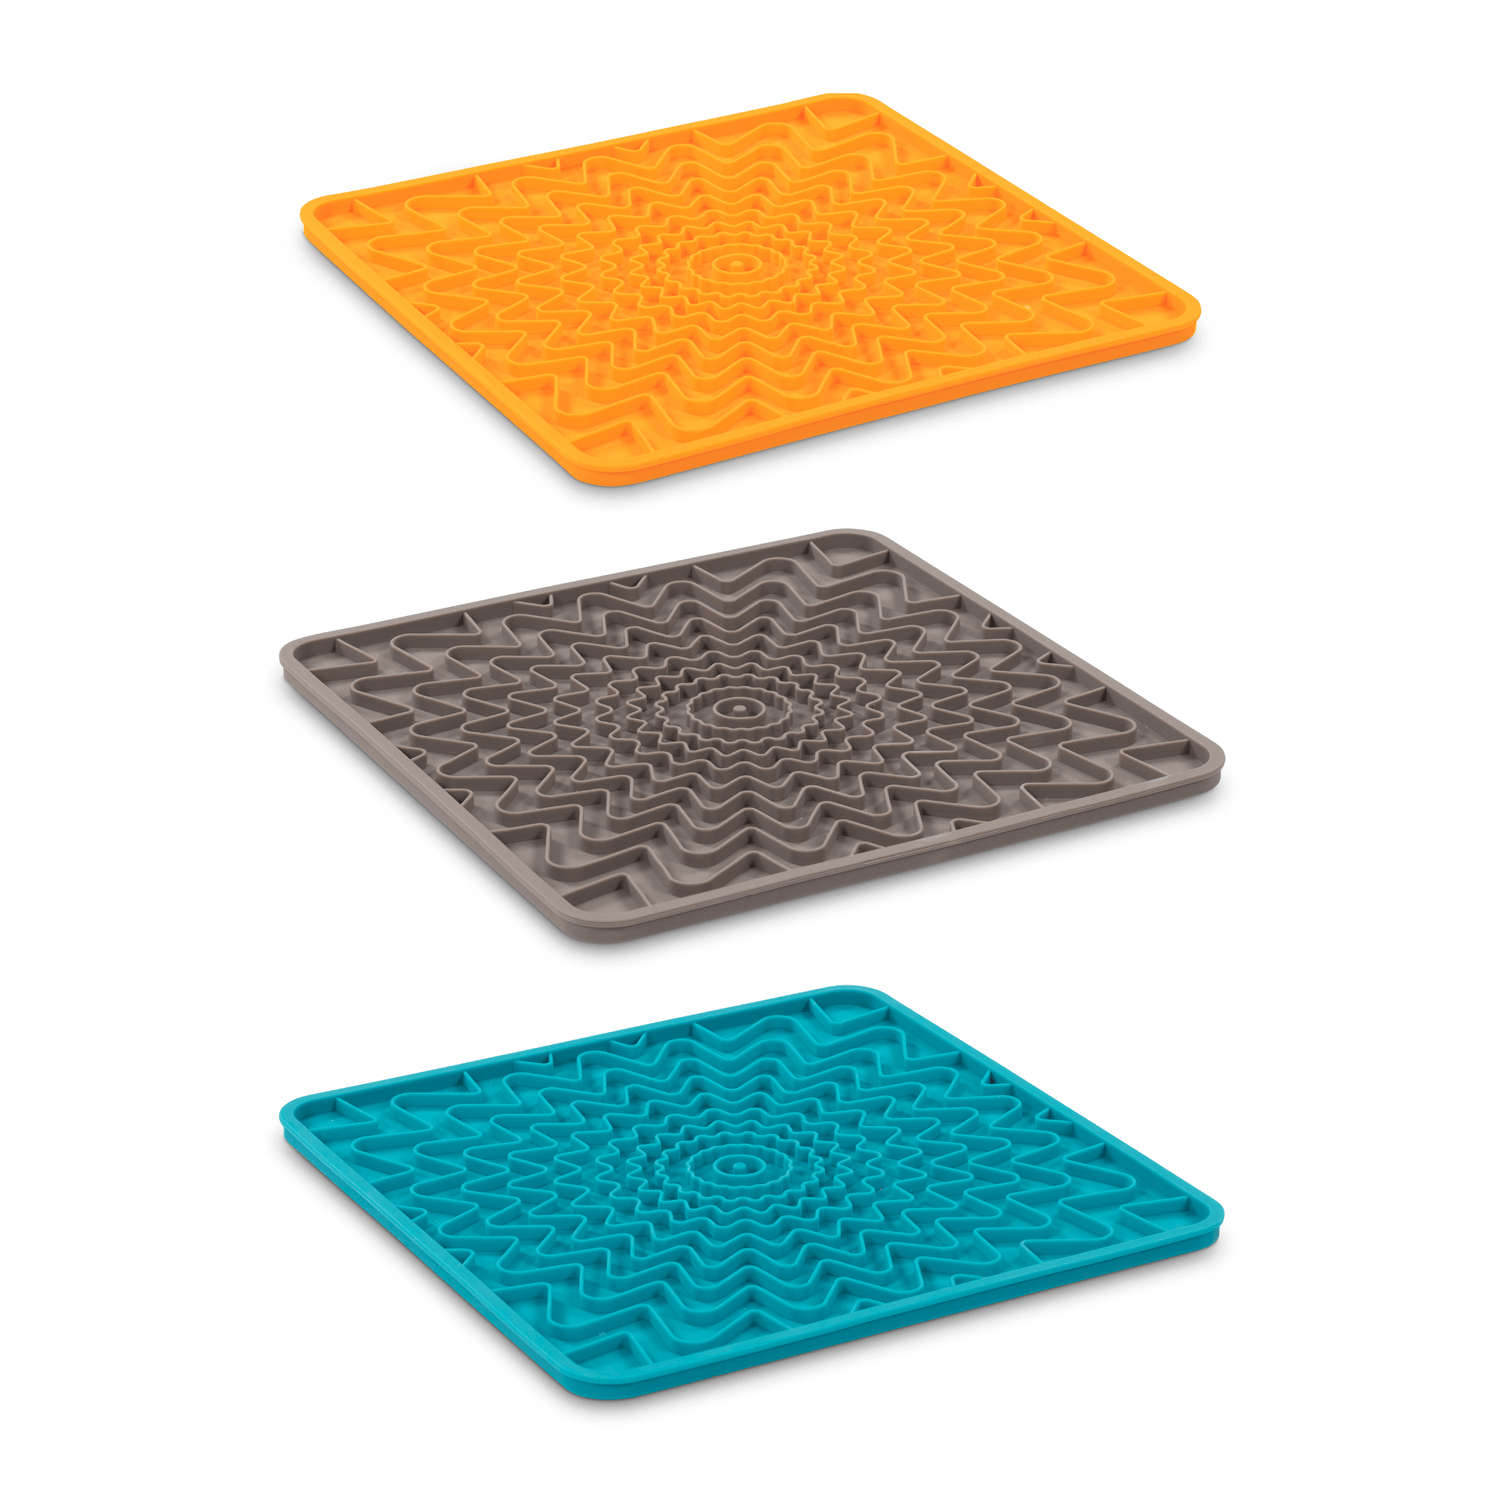 Enrichment Dog lick mats to help stimulate your dogs mentally.  Slow down feeder to aid with dog digestion. 